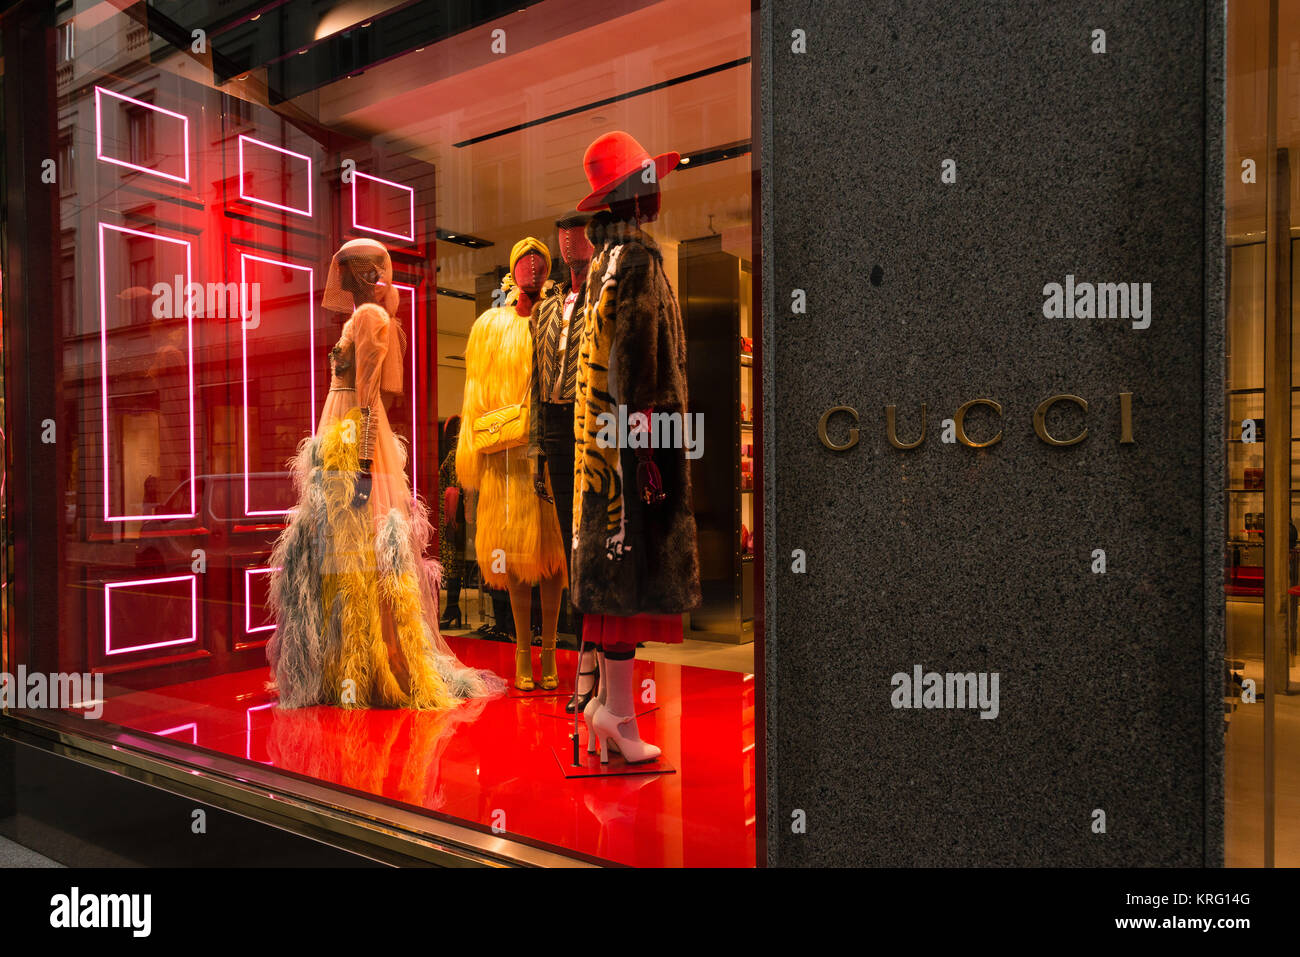 Milan, Italy - October 9, 2016: Shop window and entrance of a Gucci shop in  Milan - Montenapoleone street, Italy. Few days after Milan Fashion Week. F  Stock Photo - Alamy